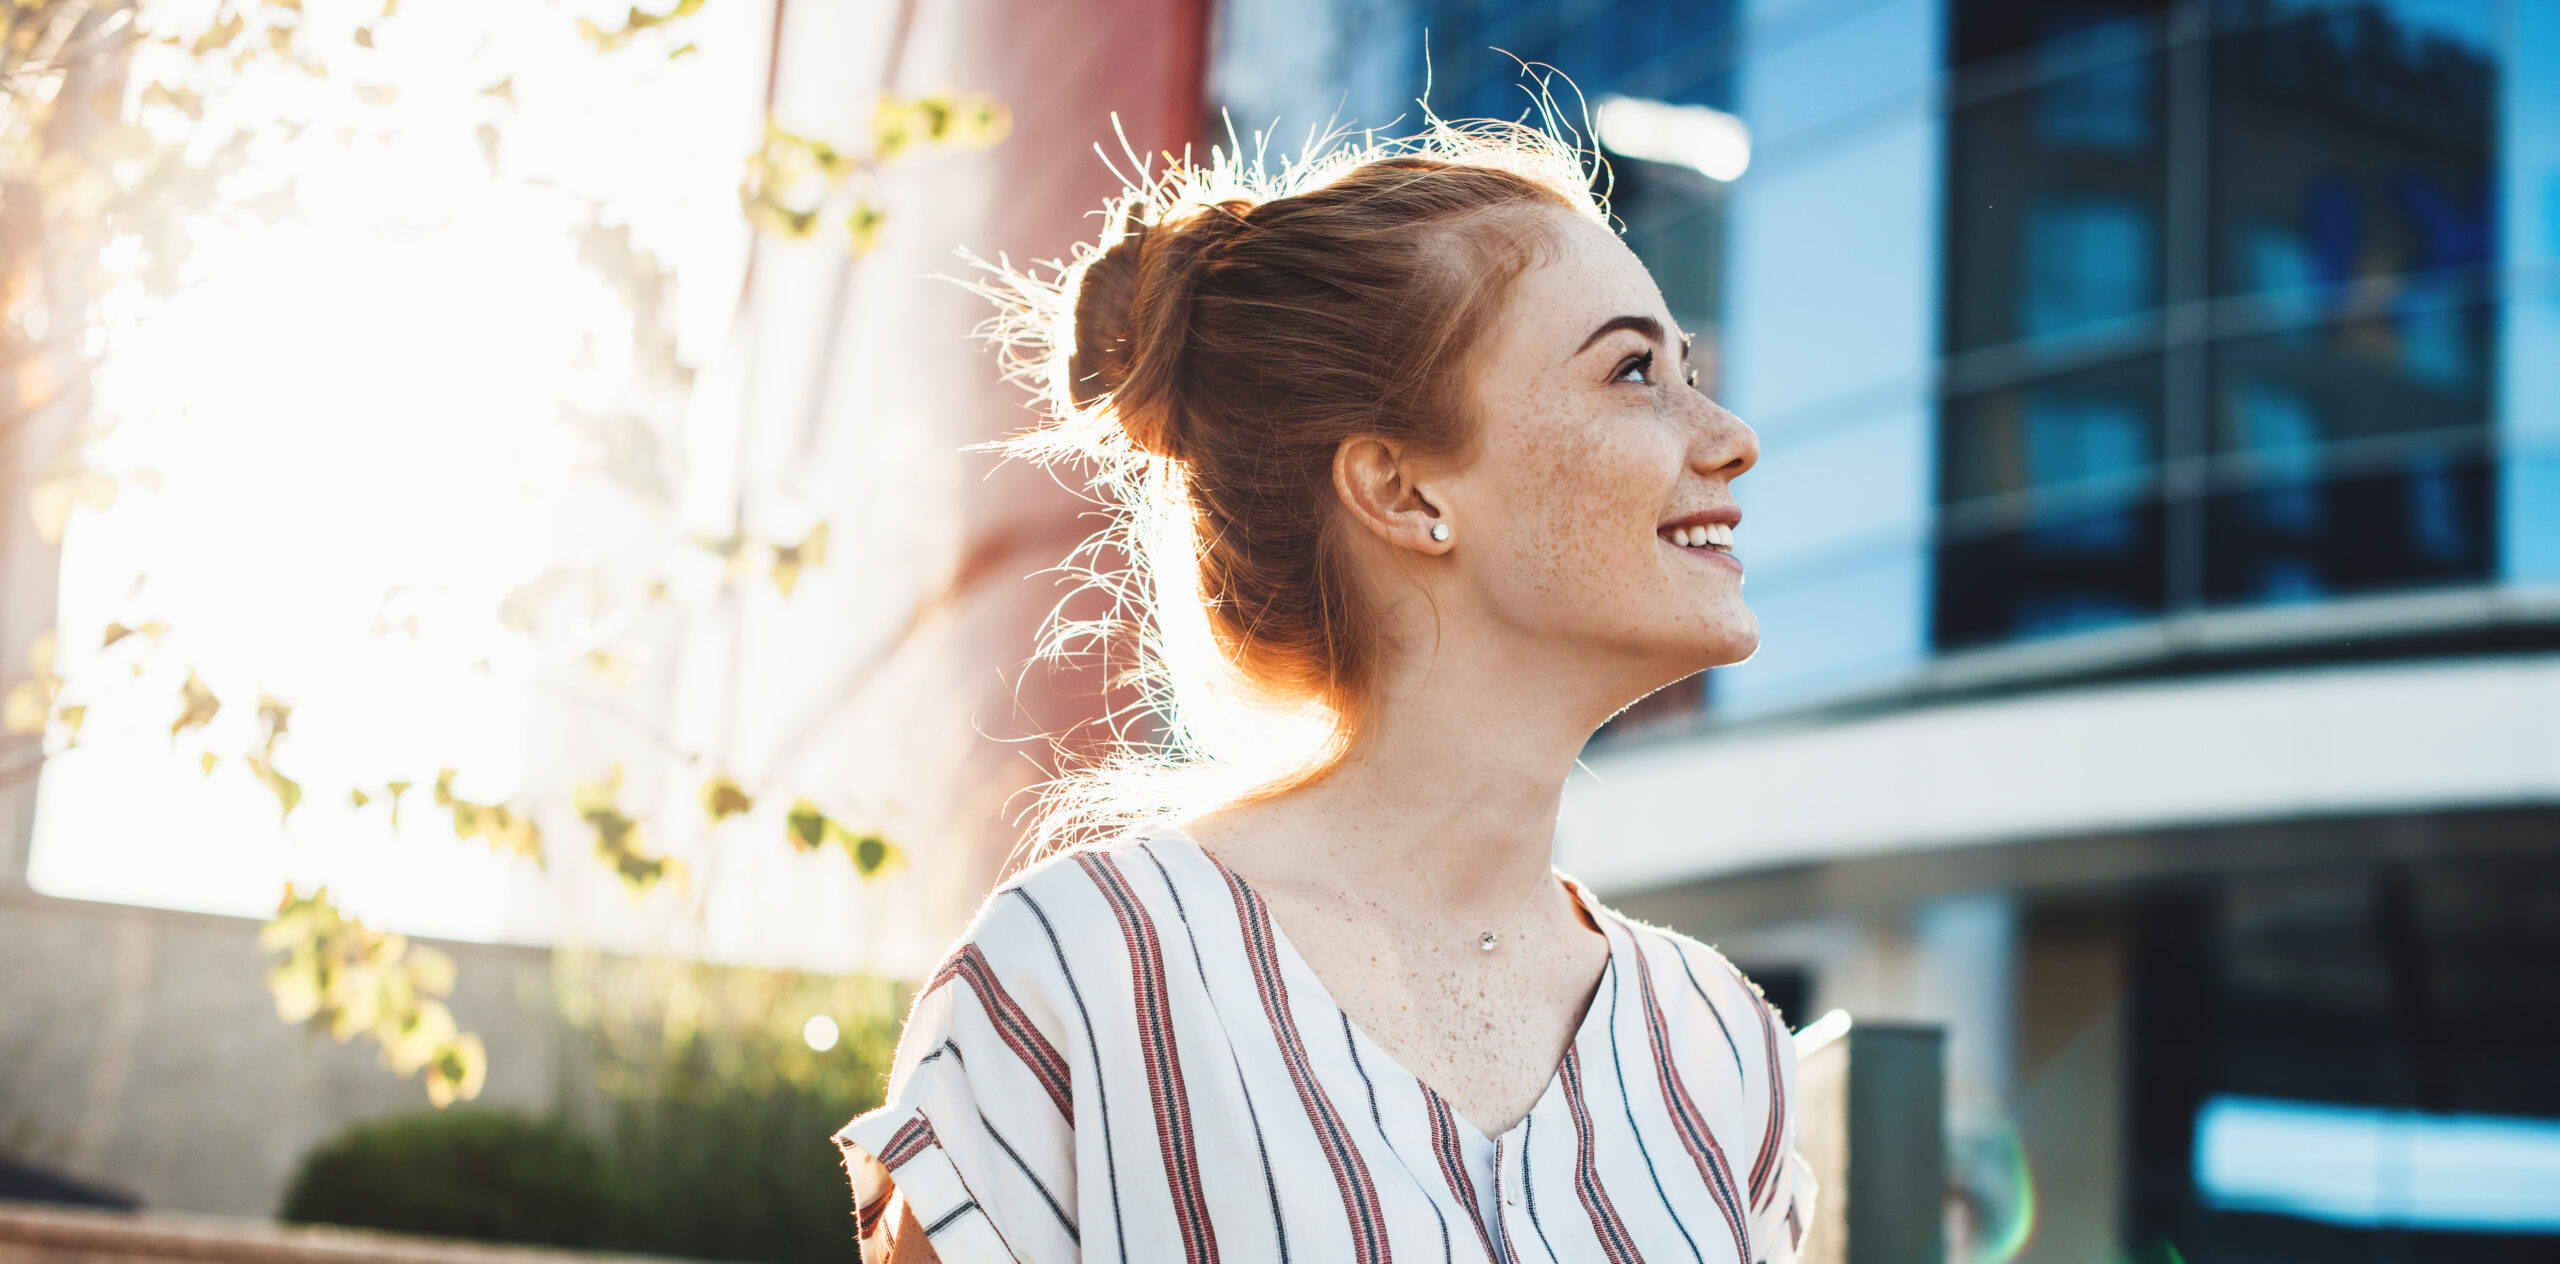 Cheerful young woman with freckles and red hair posing against the sunshine and smile looking up